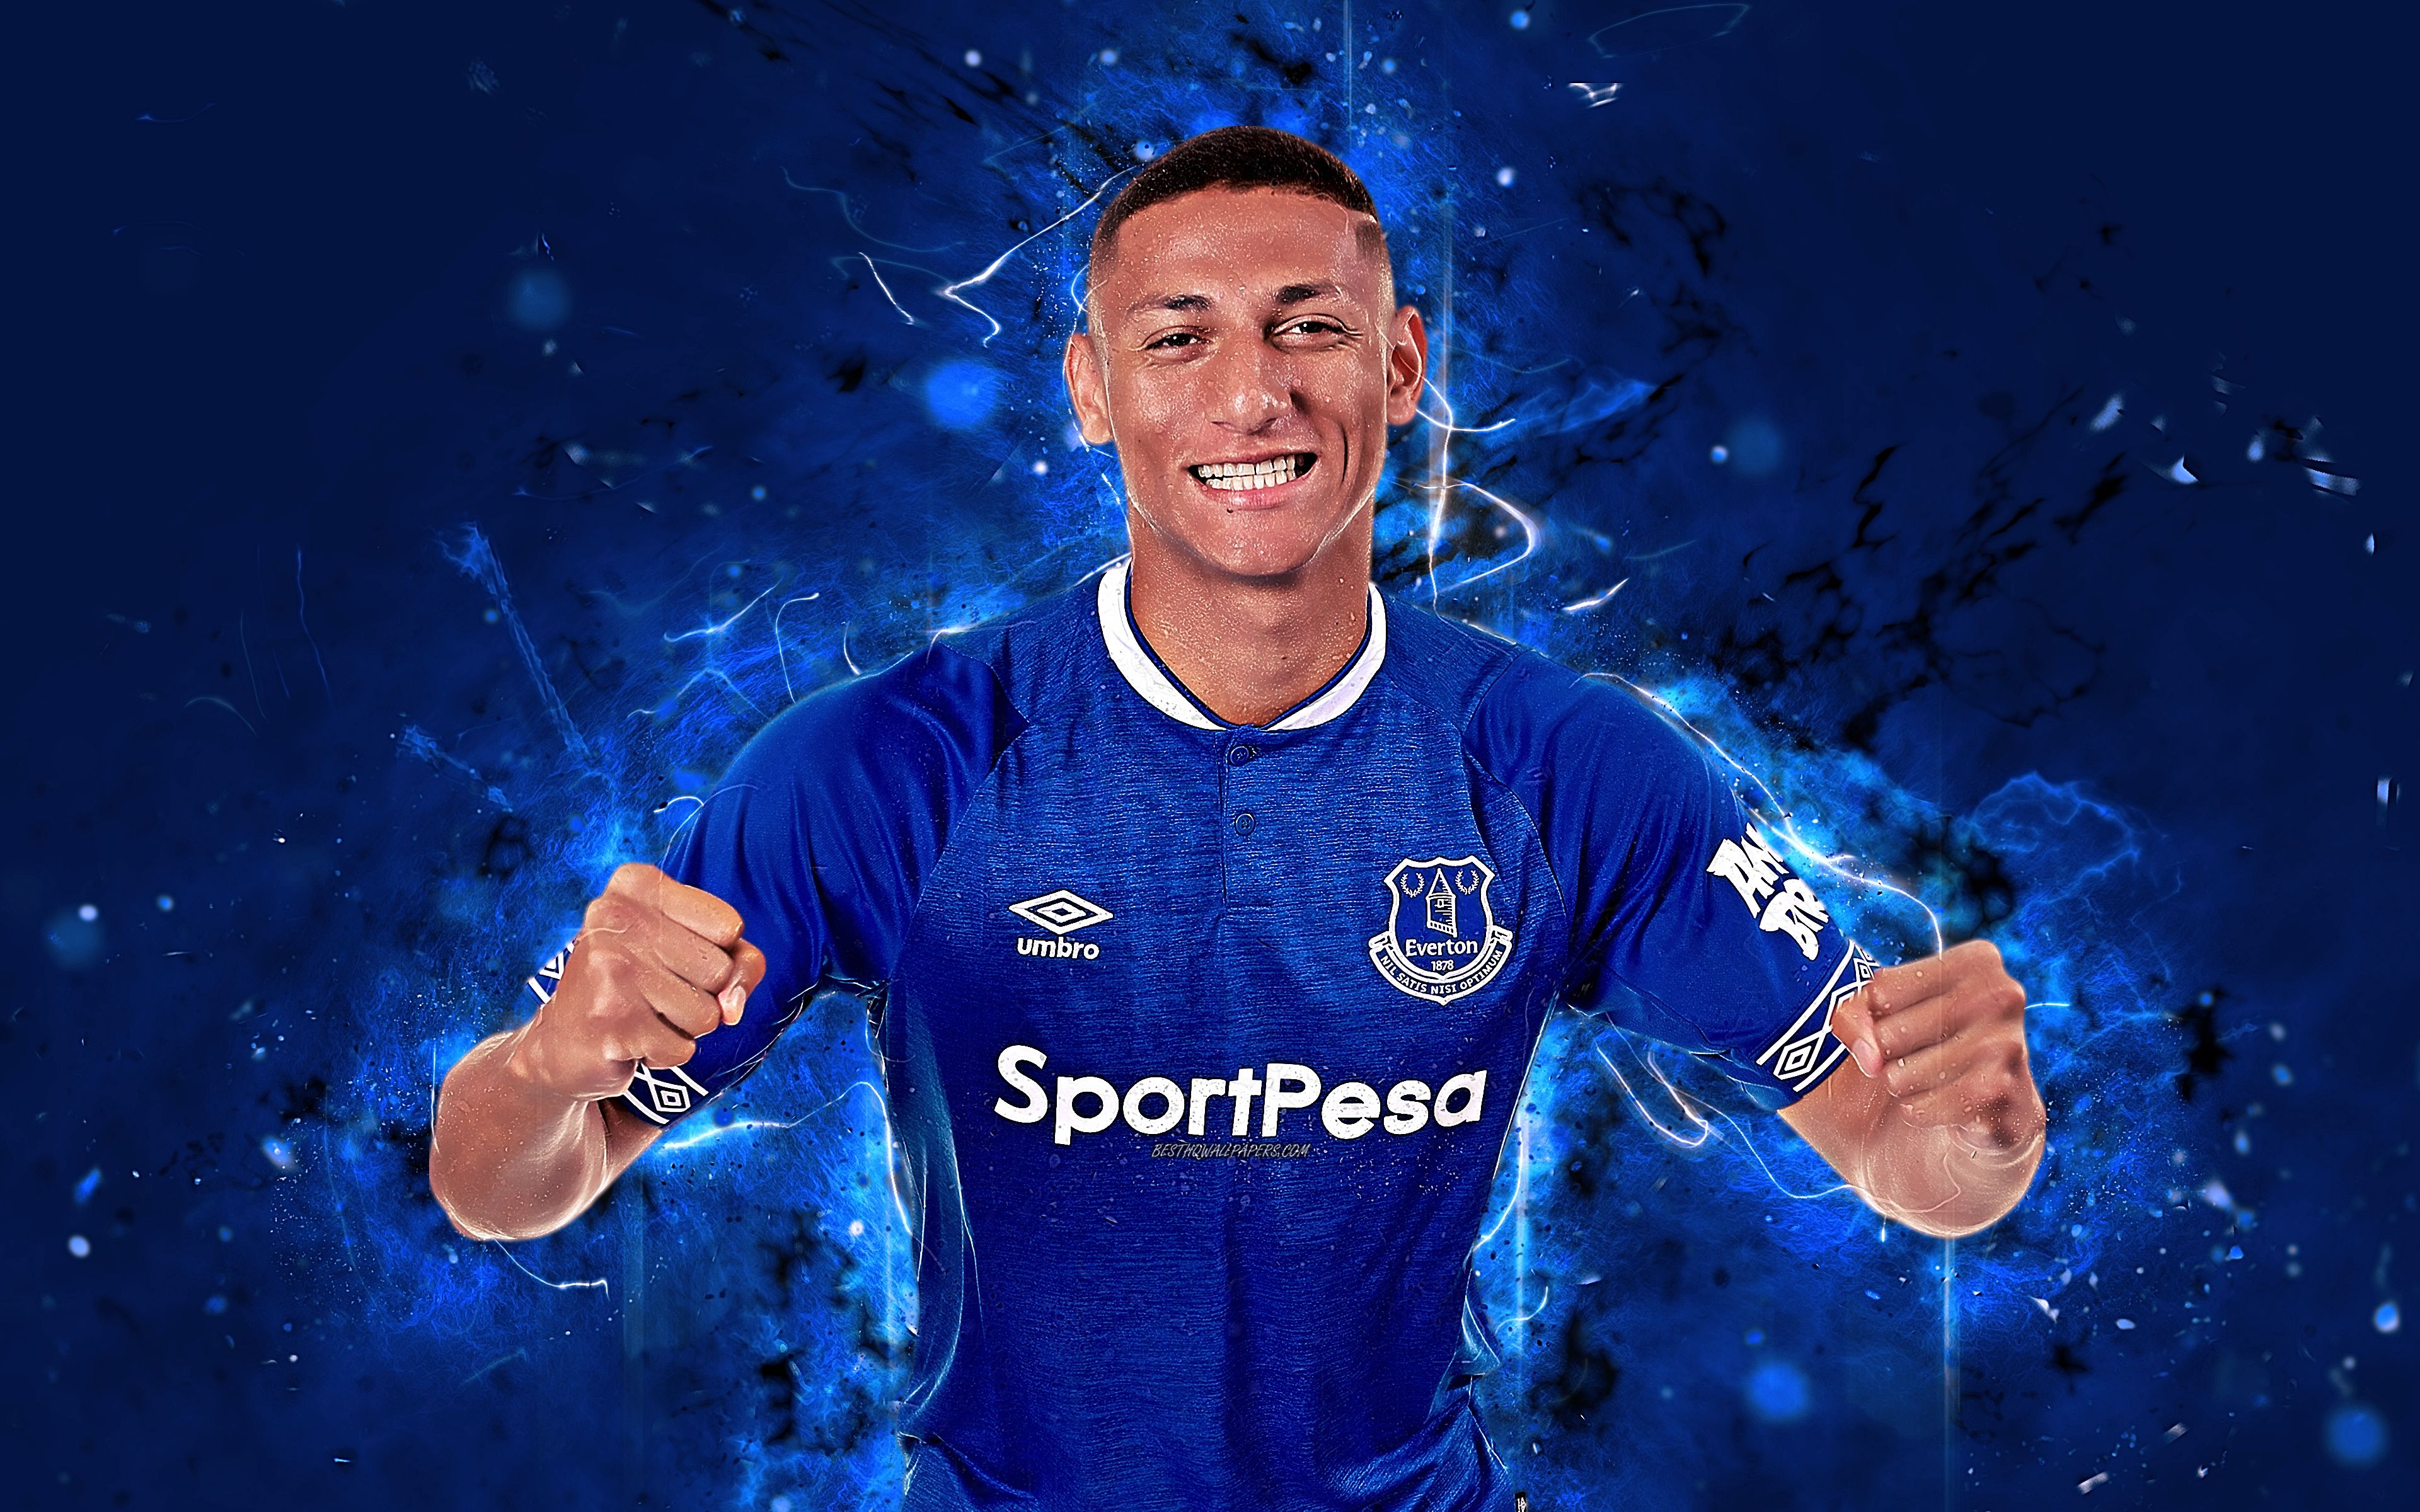 Download wallpaper 4k, Richarlison, abstract art, football stars, Everton, soccer, Richarlison de Andrade, Premier League, footballers, neon lights, Everton FC for desktop with resolution 3840x2400. High Quality HD picture wallpaper